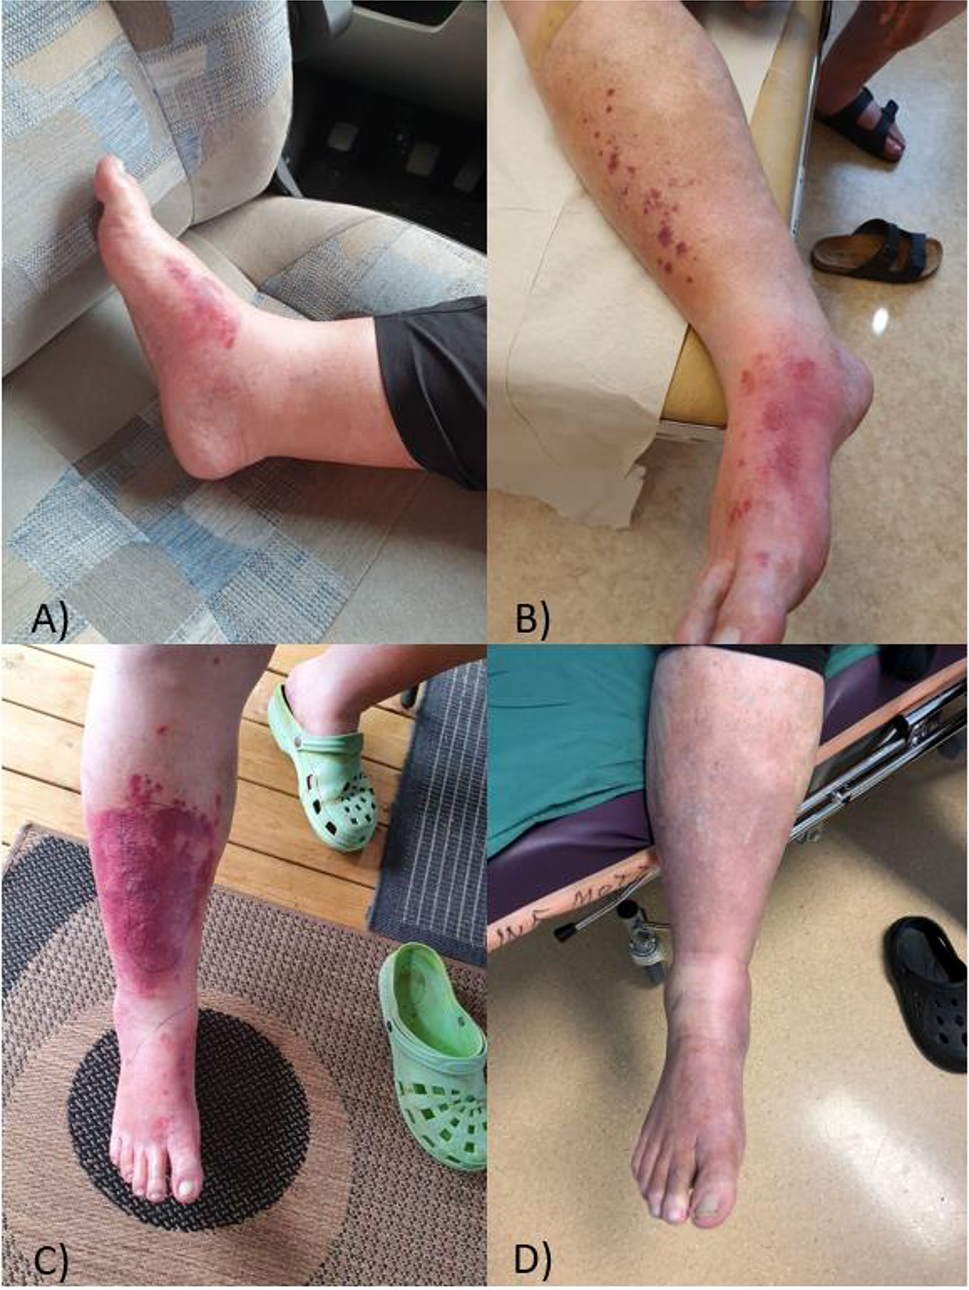 Chromobacterium sp. septicemia in Sweden. A clinical case report